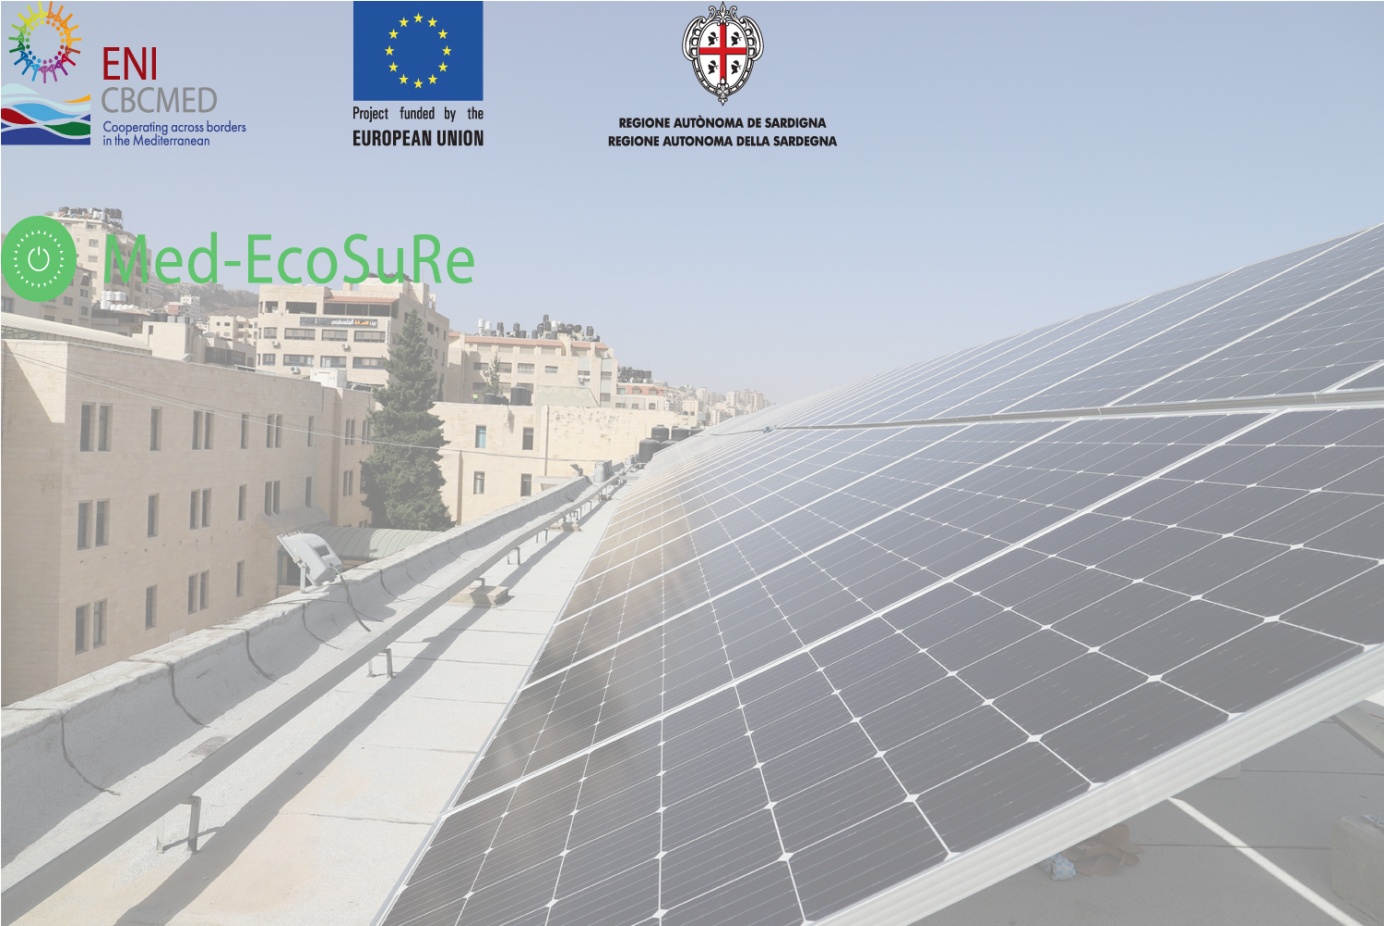 Energy efficiency in Mediterranean universities: Med-EcoSuRe project unveils first year results